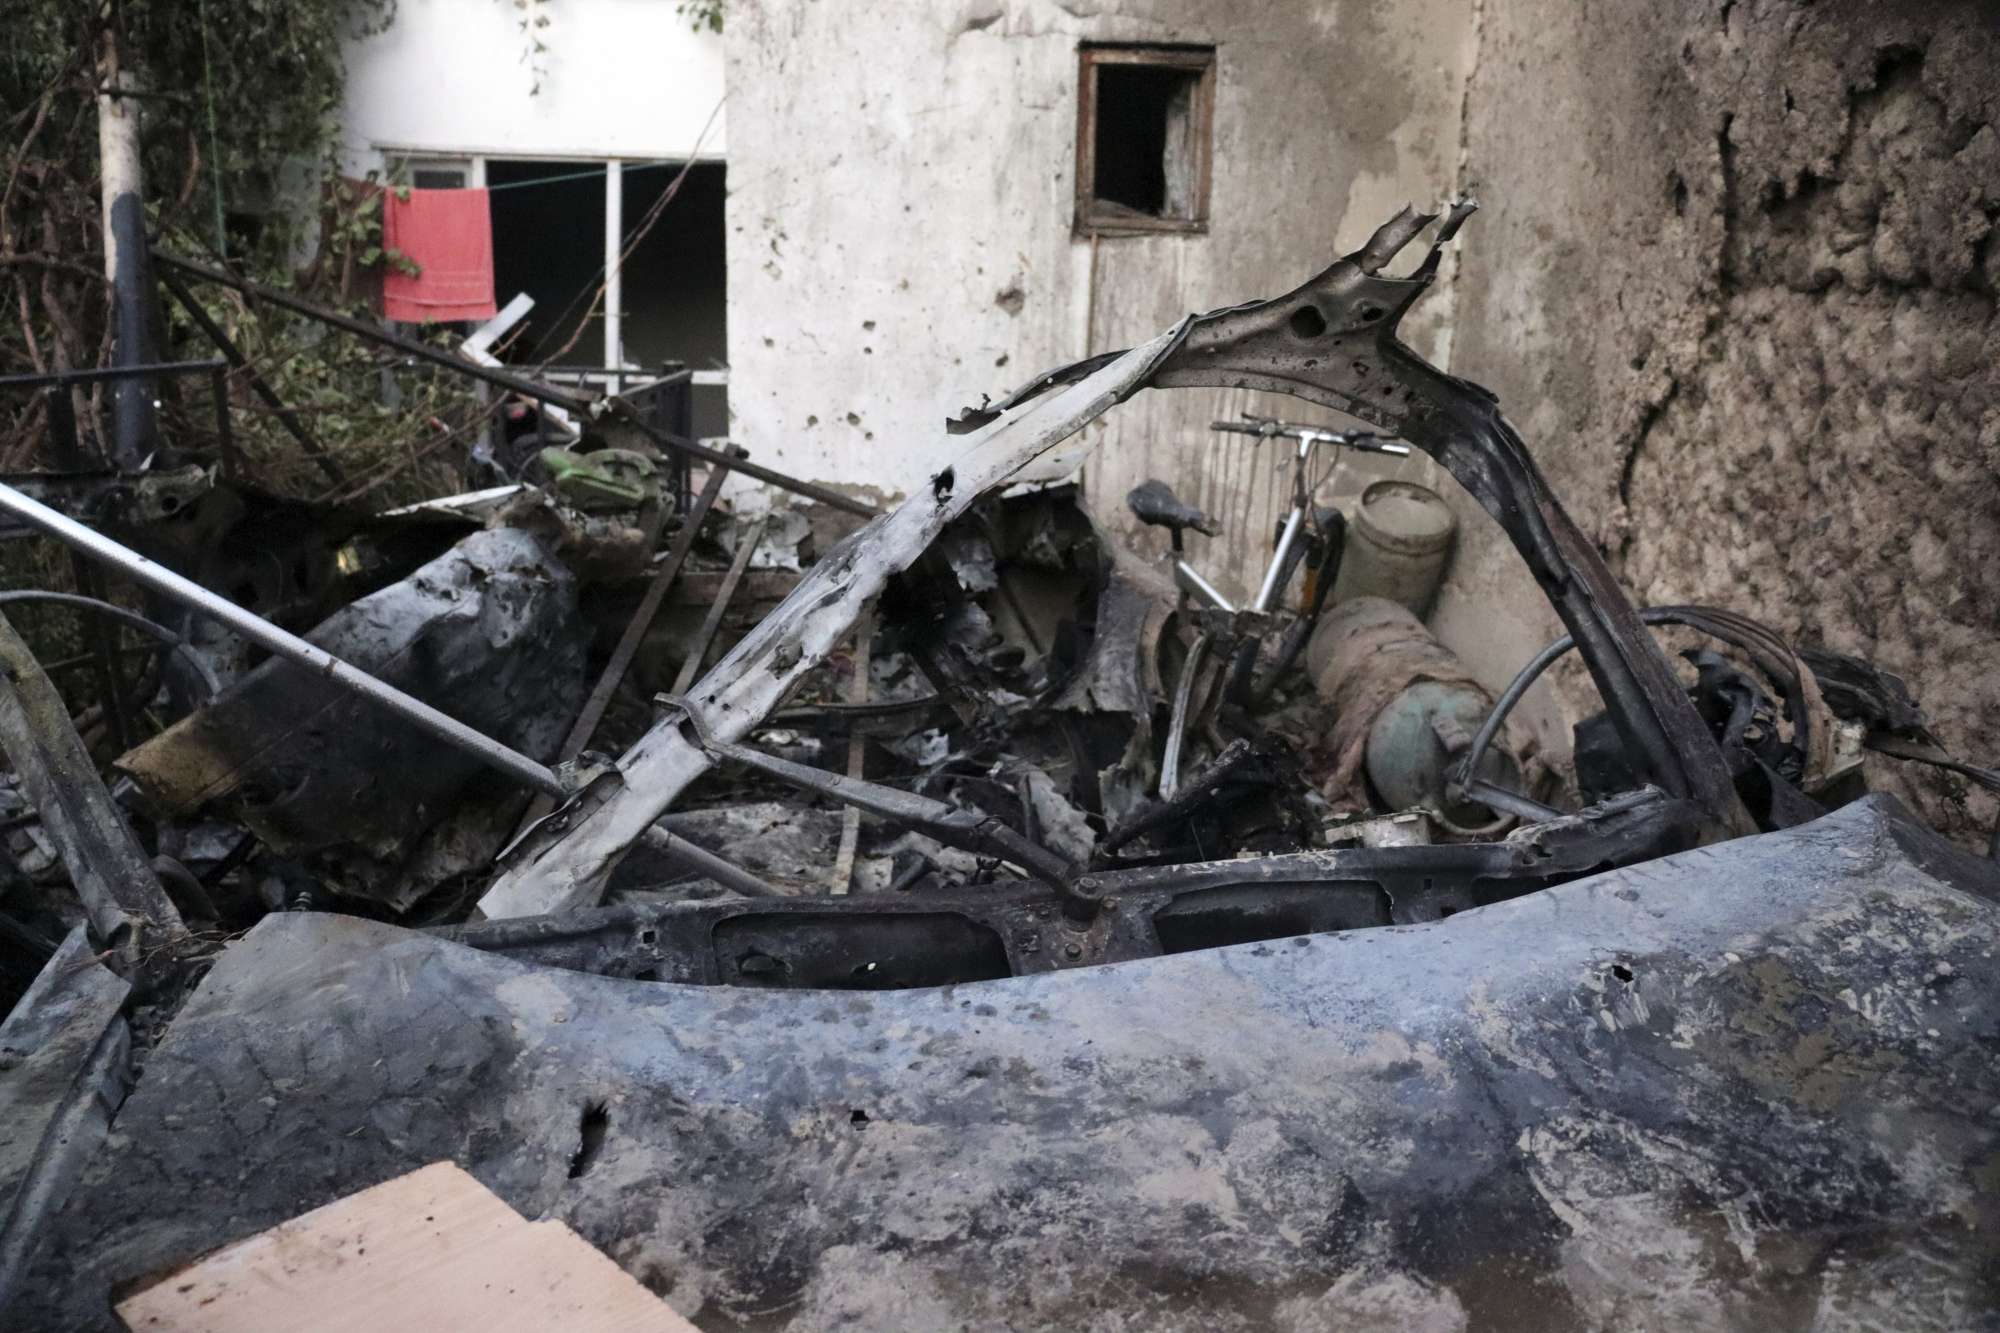 Destroyed vehicle is seen inside a house after U.S. drone strike in Kabul, Afghanistan, Sunday, Aug. 29, 2021. A U.S. drone strike destroyed a vehicle carrying "multiple suicide bombers" from Afghanistan's Islamic State affiliate on Sunday before they could attack the ongoing military evacuation at Kabul's international airport, American officials said. (AP Photo/Khwaja Tawfiq Sediqi)